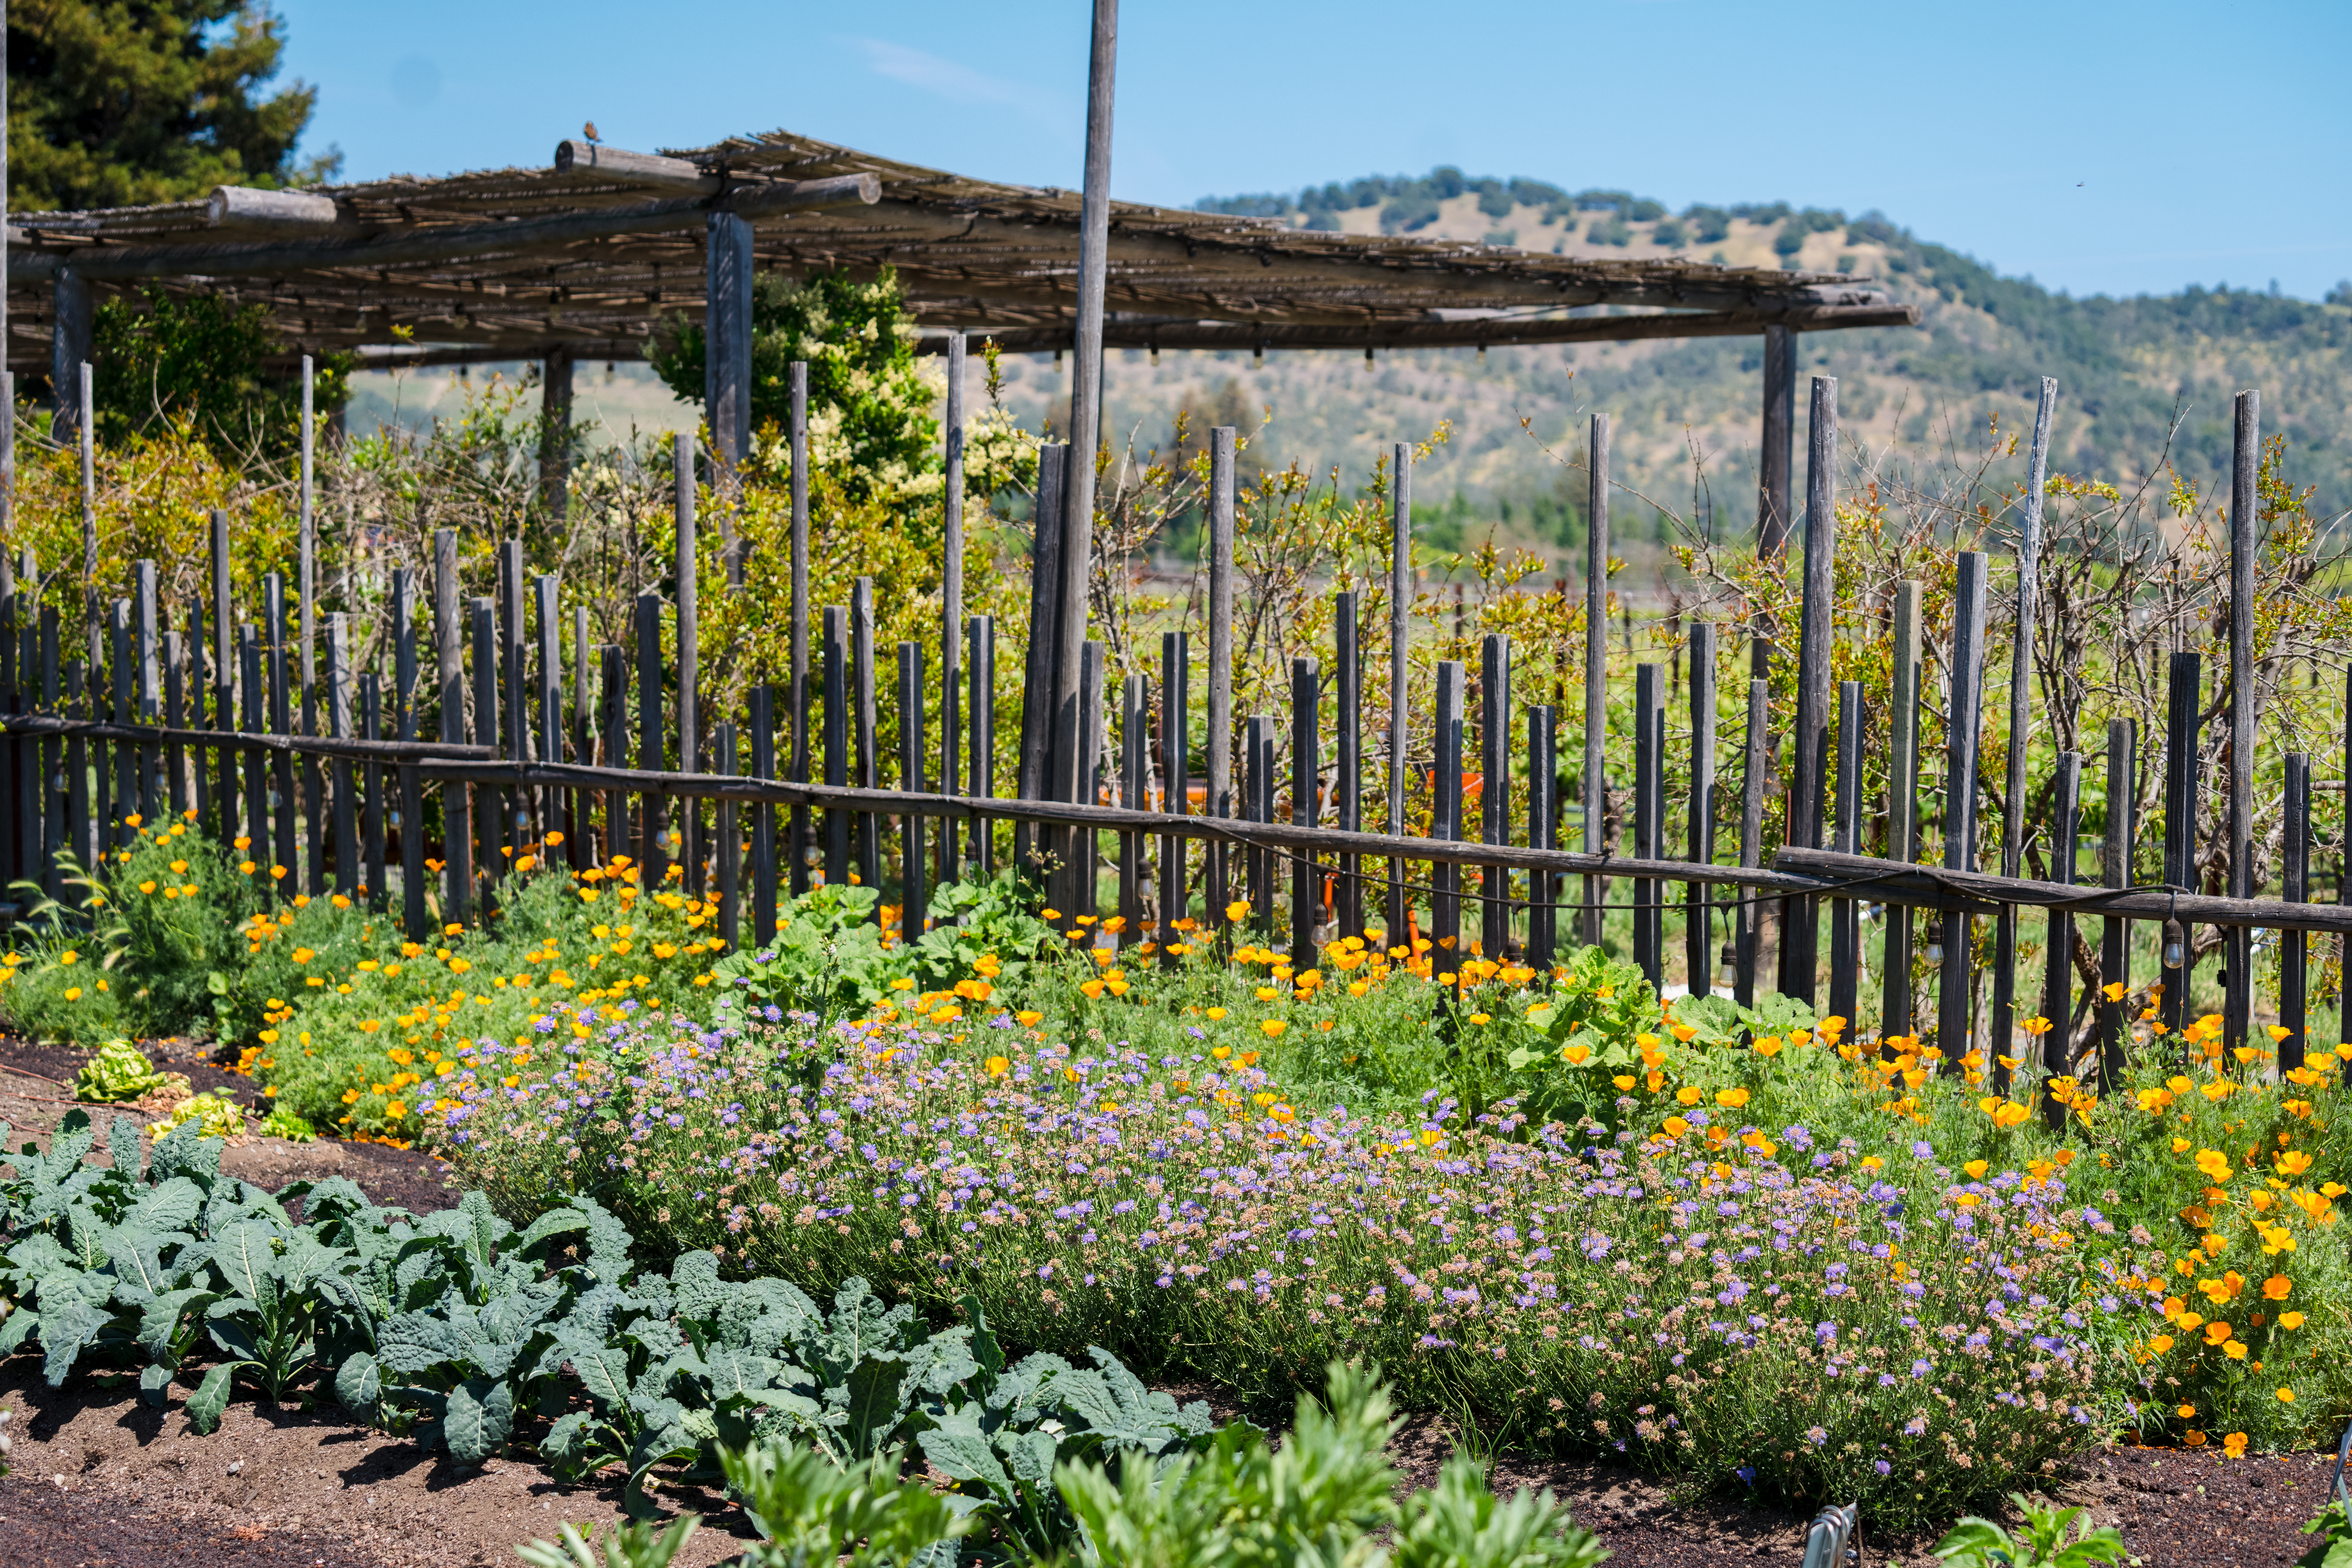 Flowers and produce in a spring garden